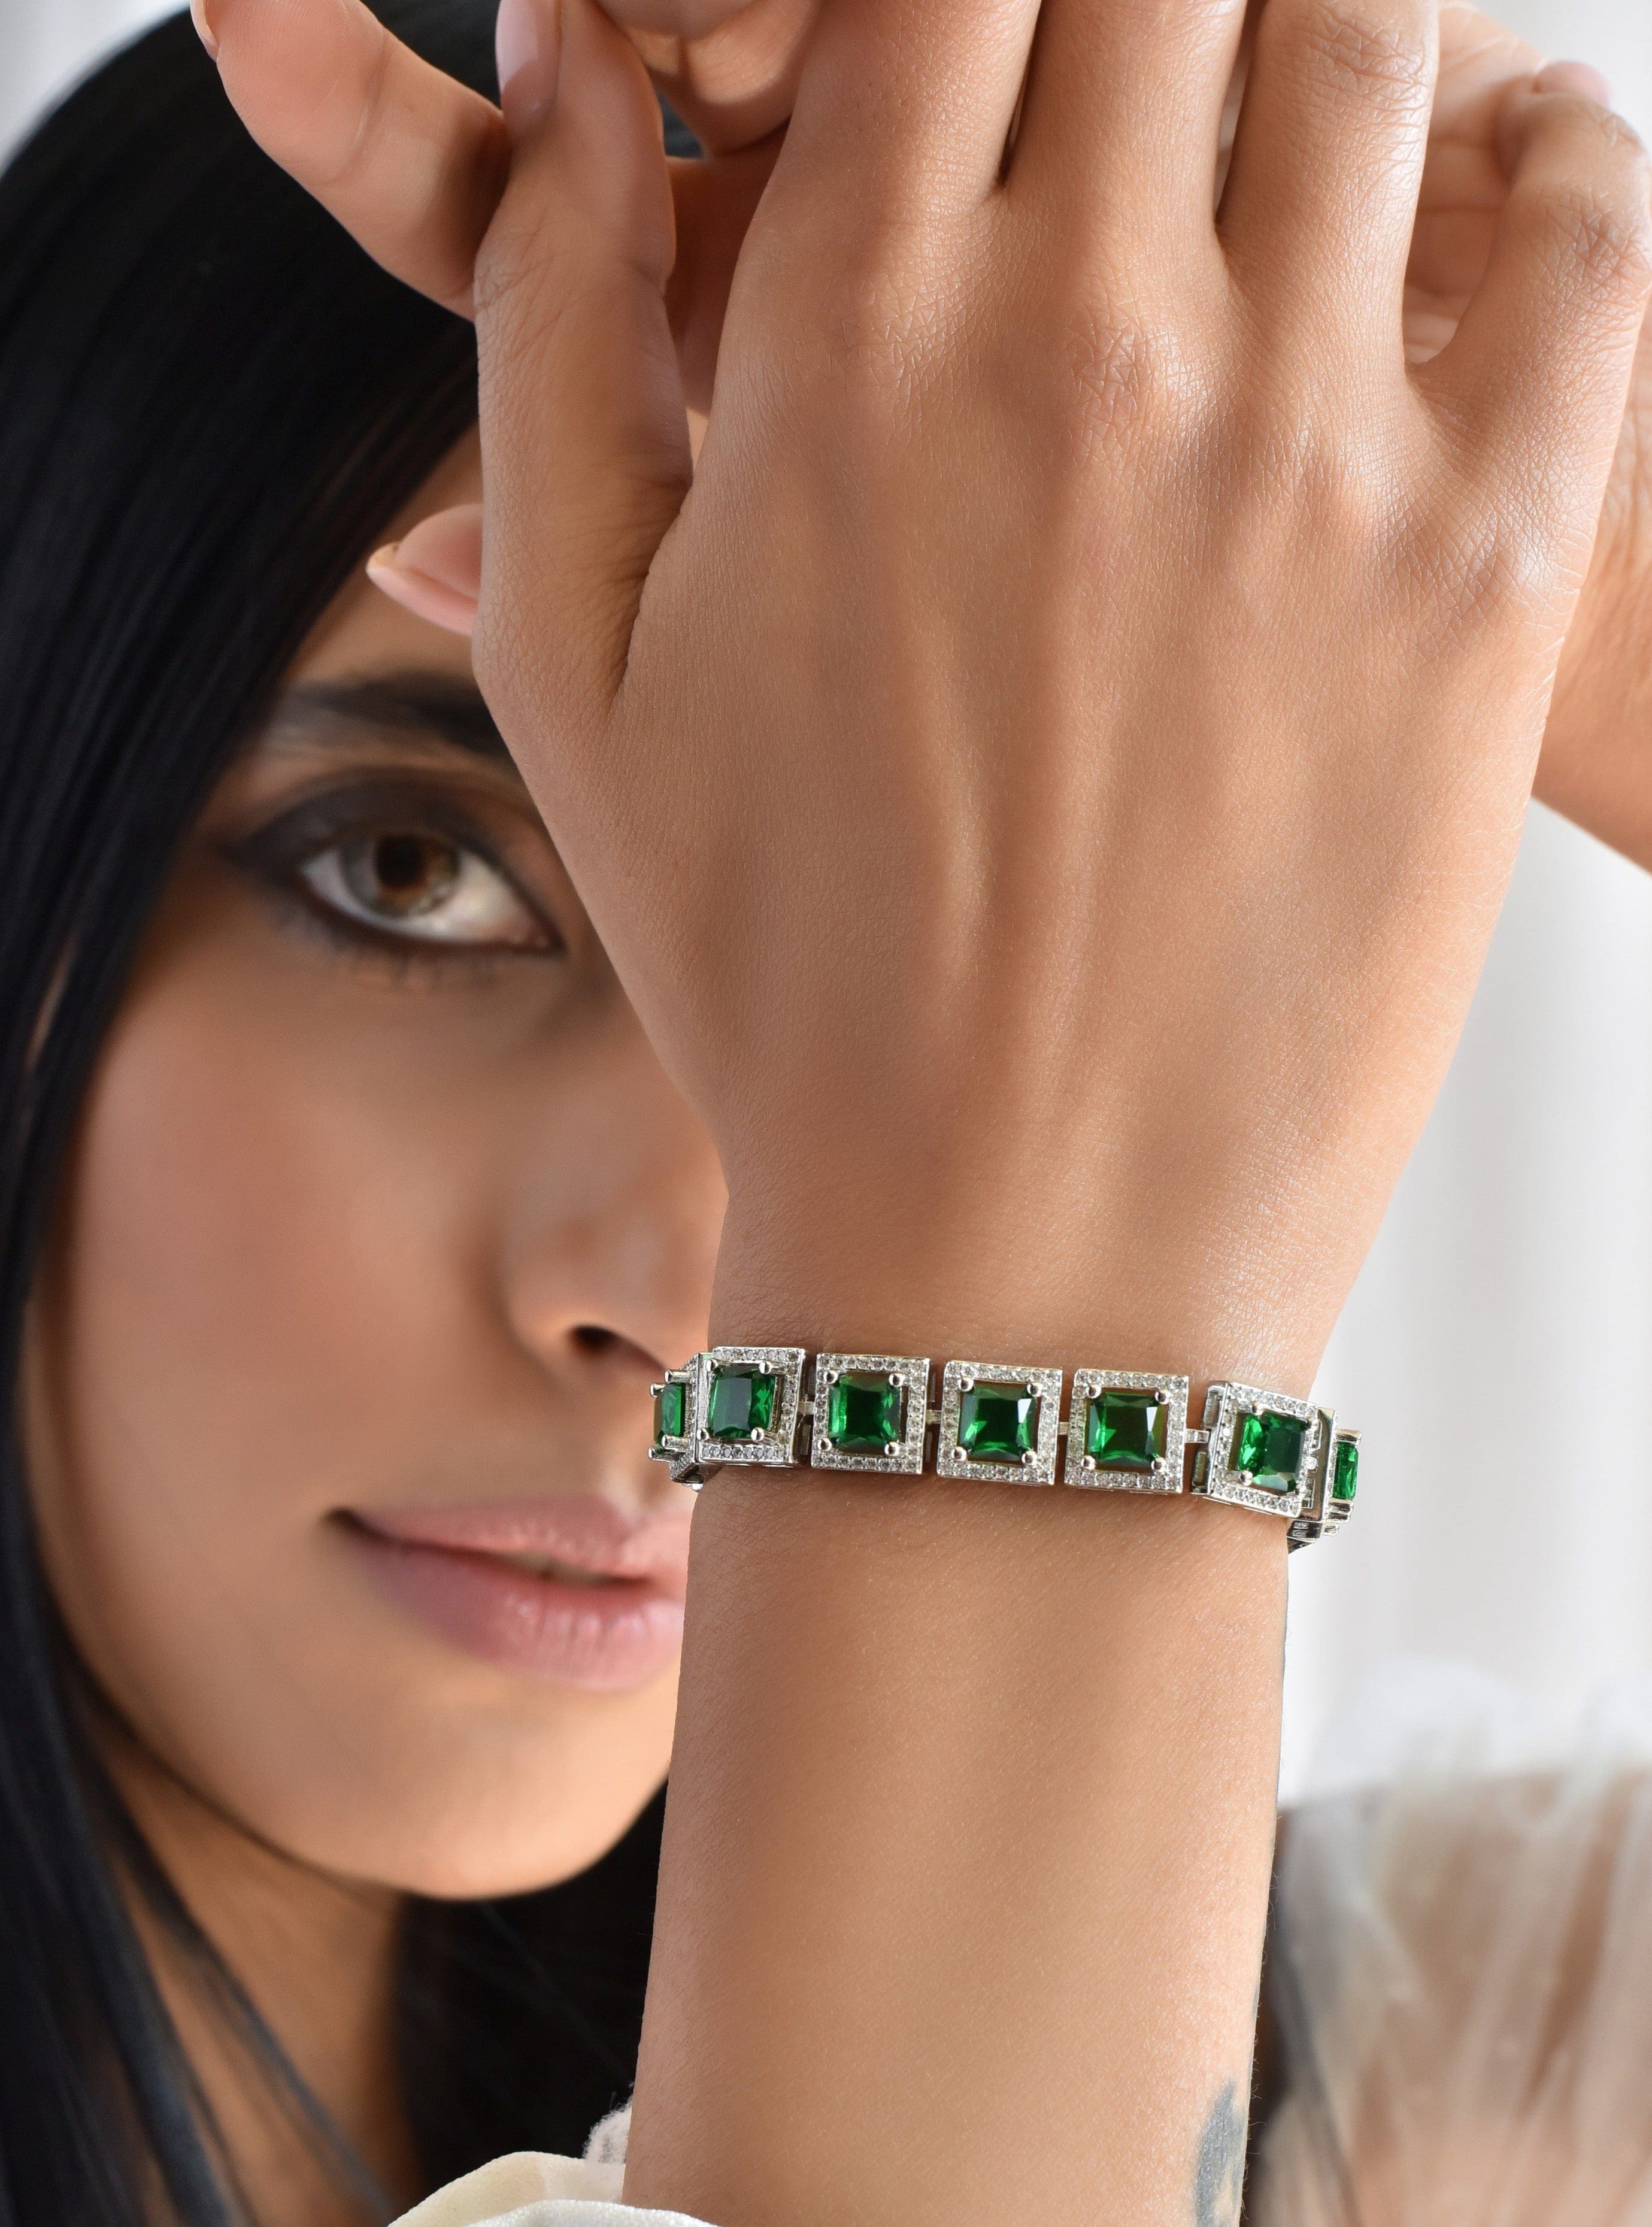 Handmade item Dispatches from a small business in India Bracelet length:  7.5 Inches Materials: Silver, White gold Gemstone: Emerald Chain style:  Stone & cup chain Closure: Snap lock Style: Minimalist Recycled